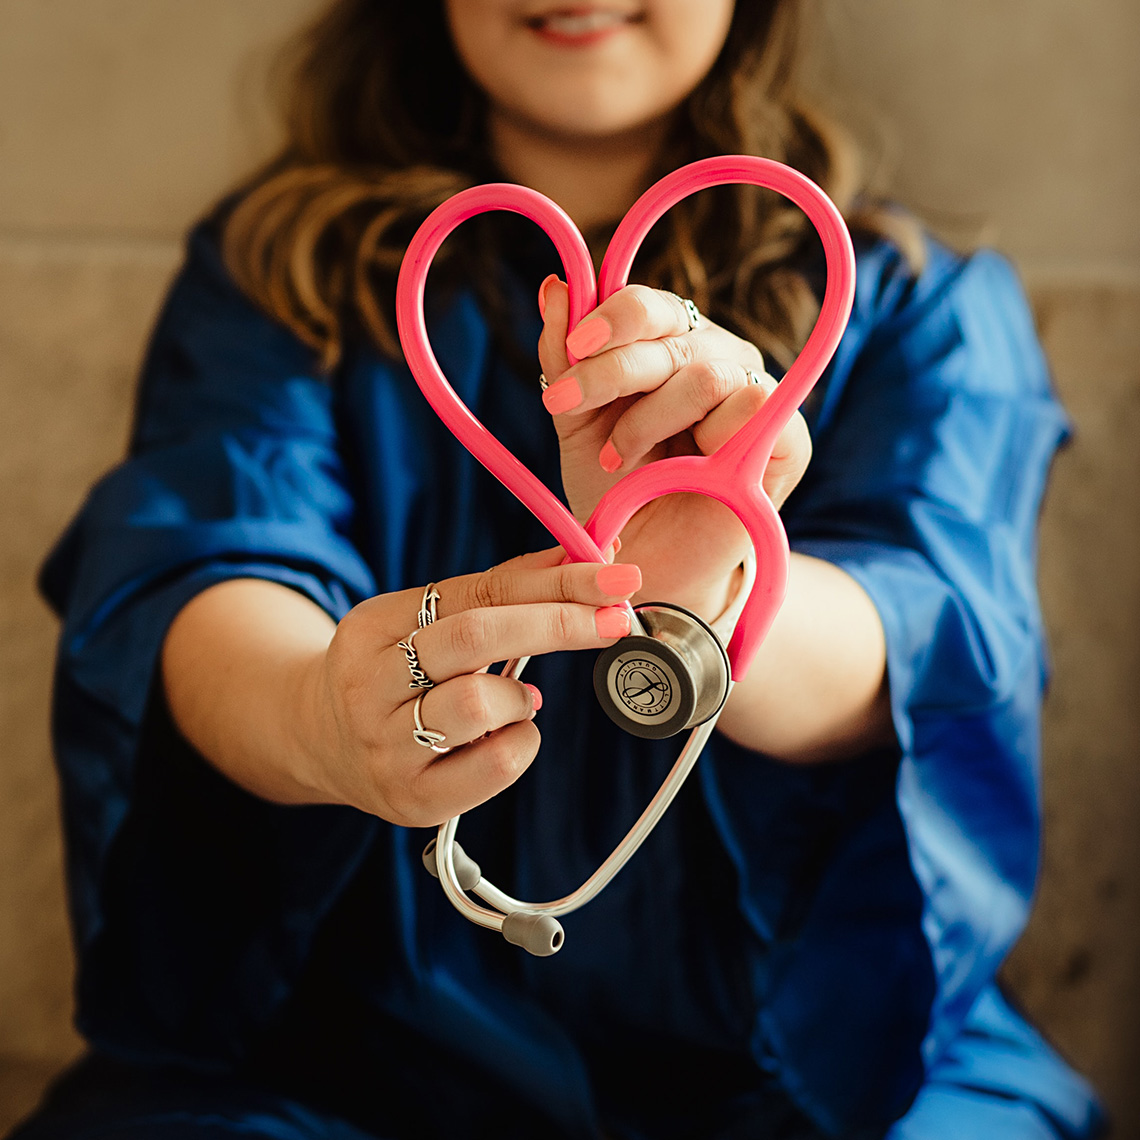 clinician holding a stethoscope in the shape of a heart